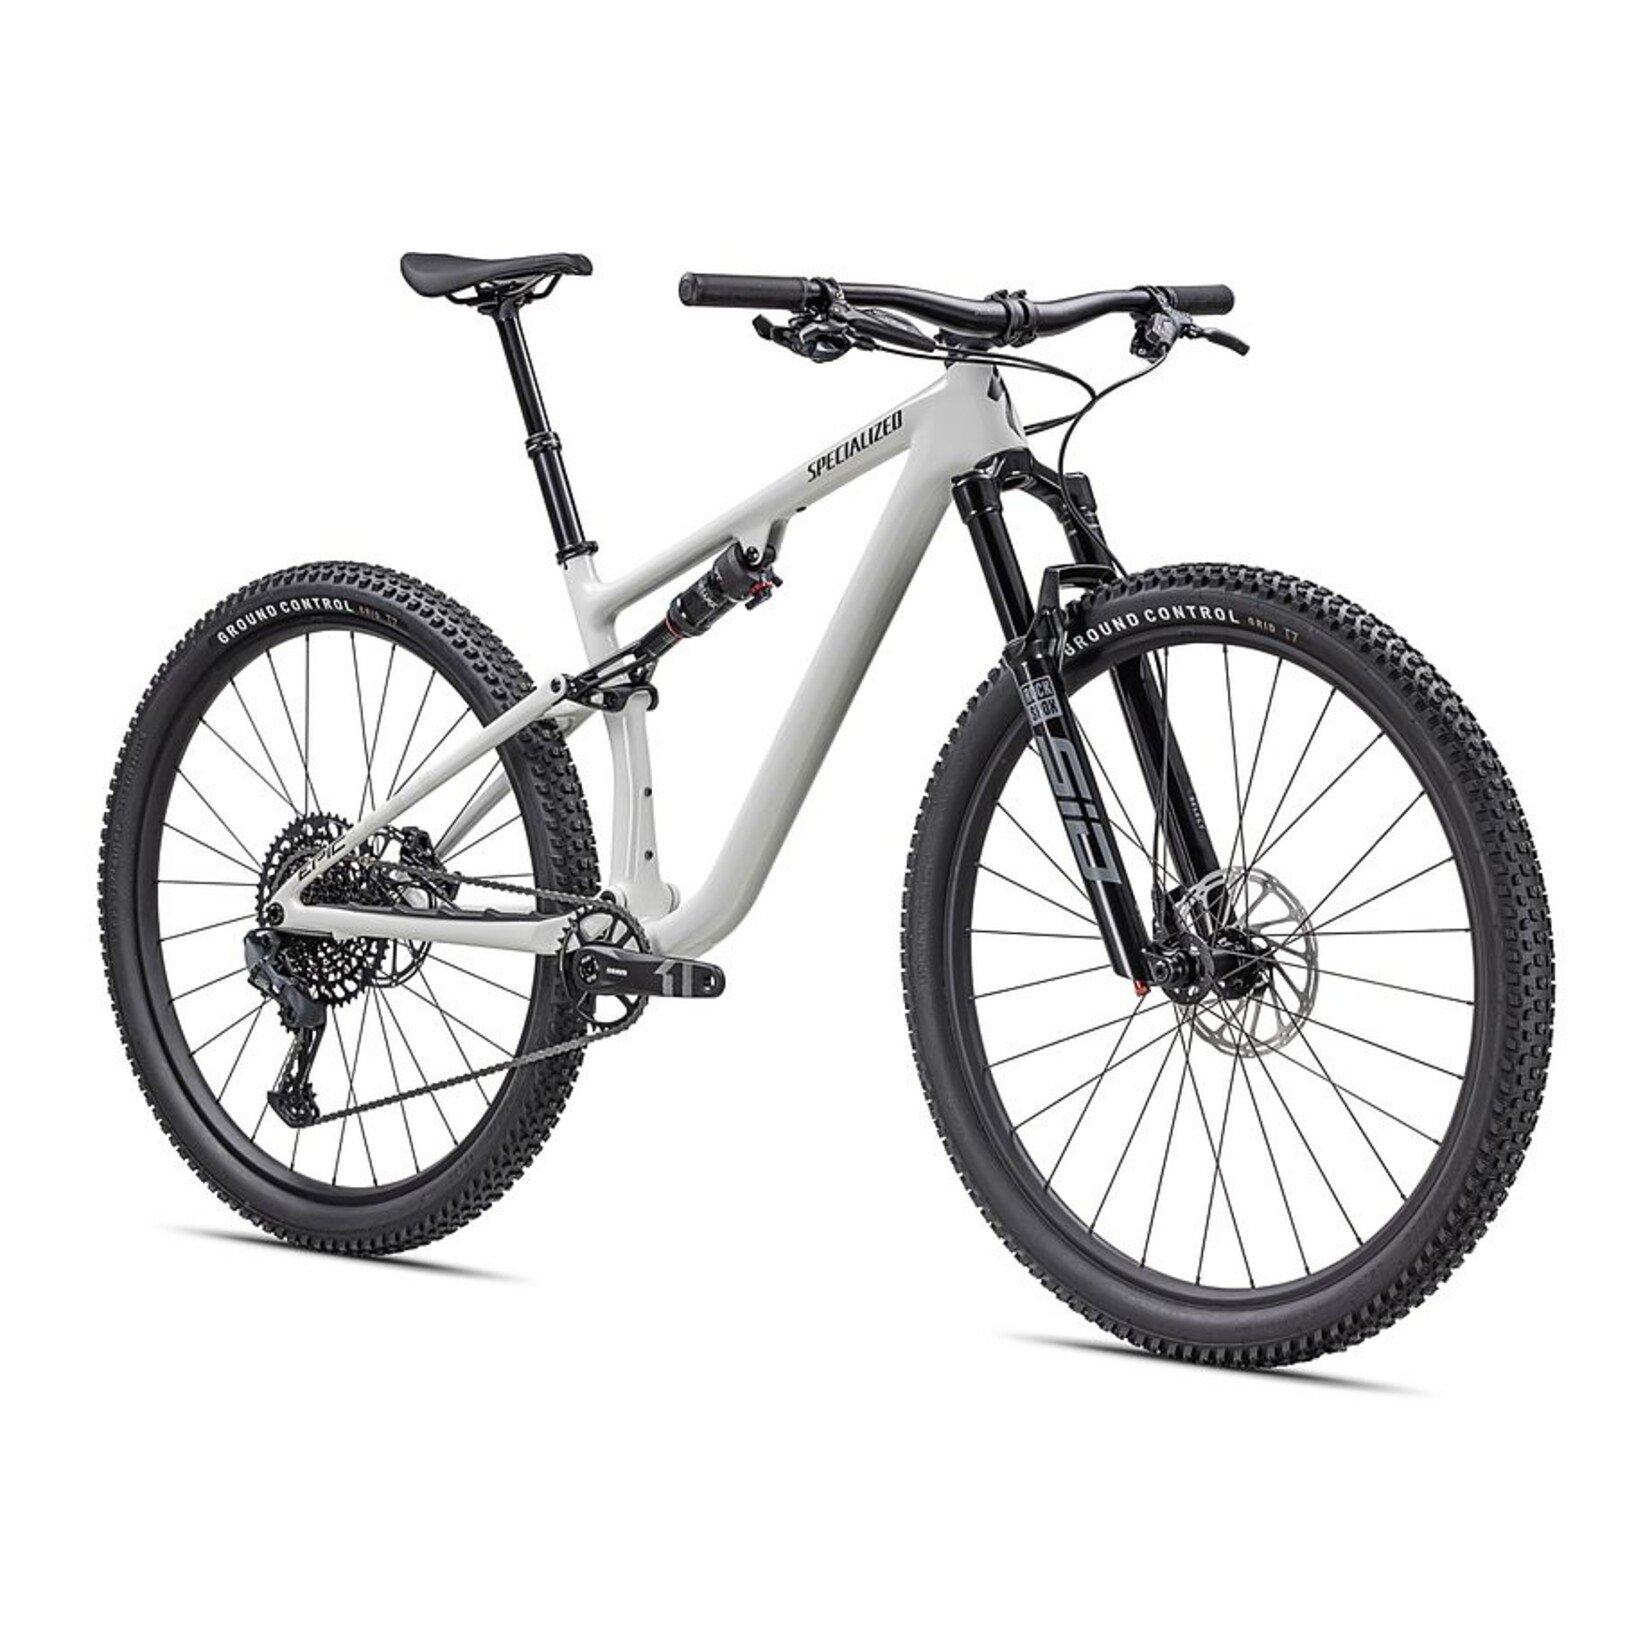 Specialized Epic EVO Comp 2023 in Gloss Dune WhiteObsidianPearl